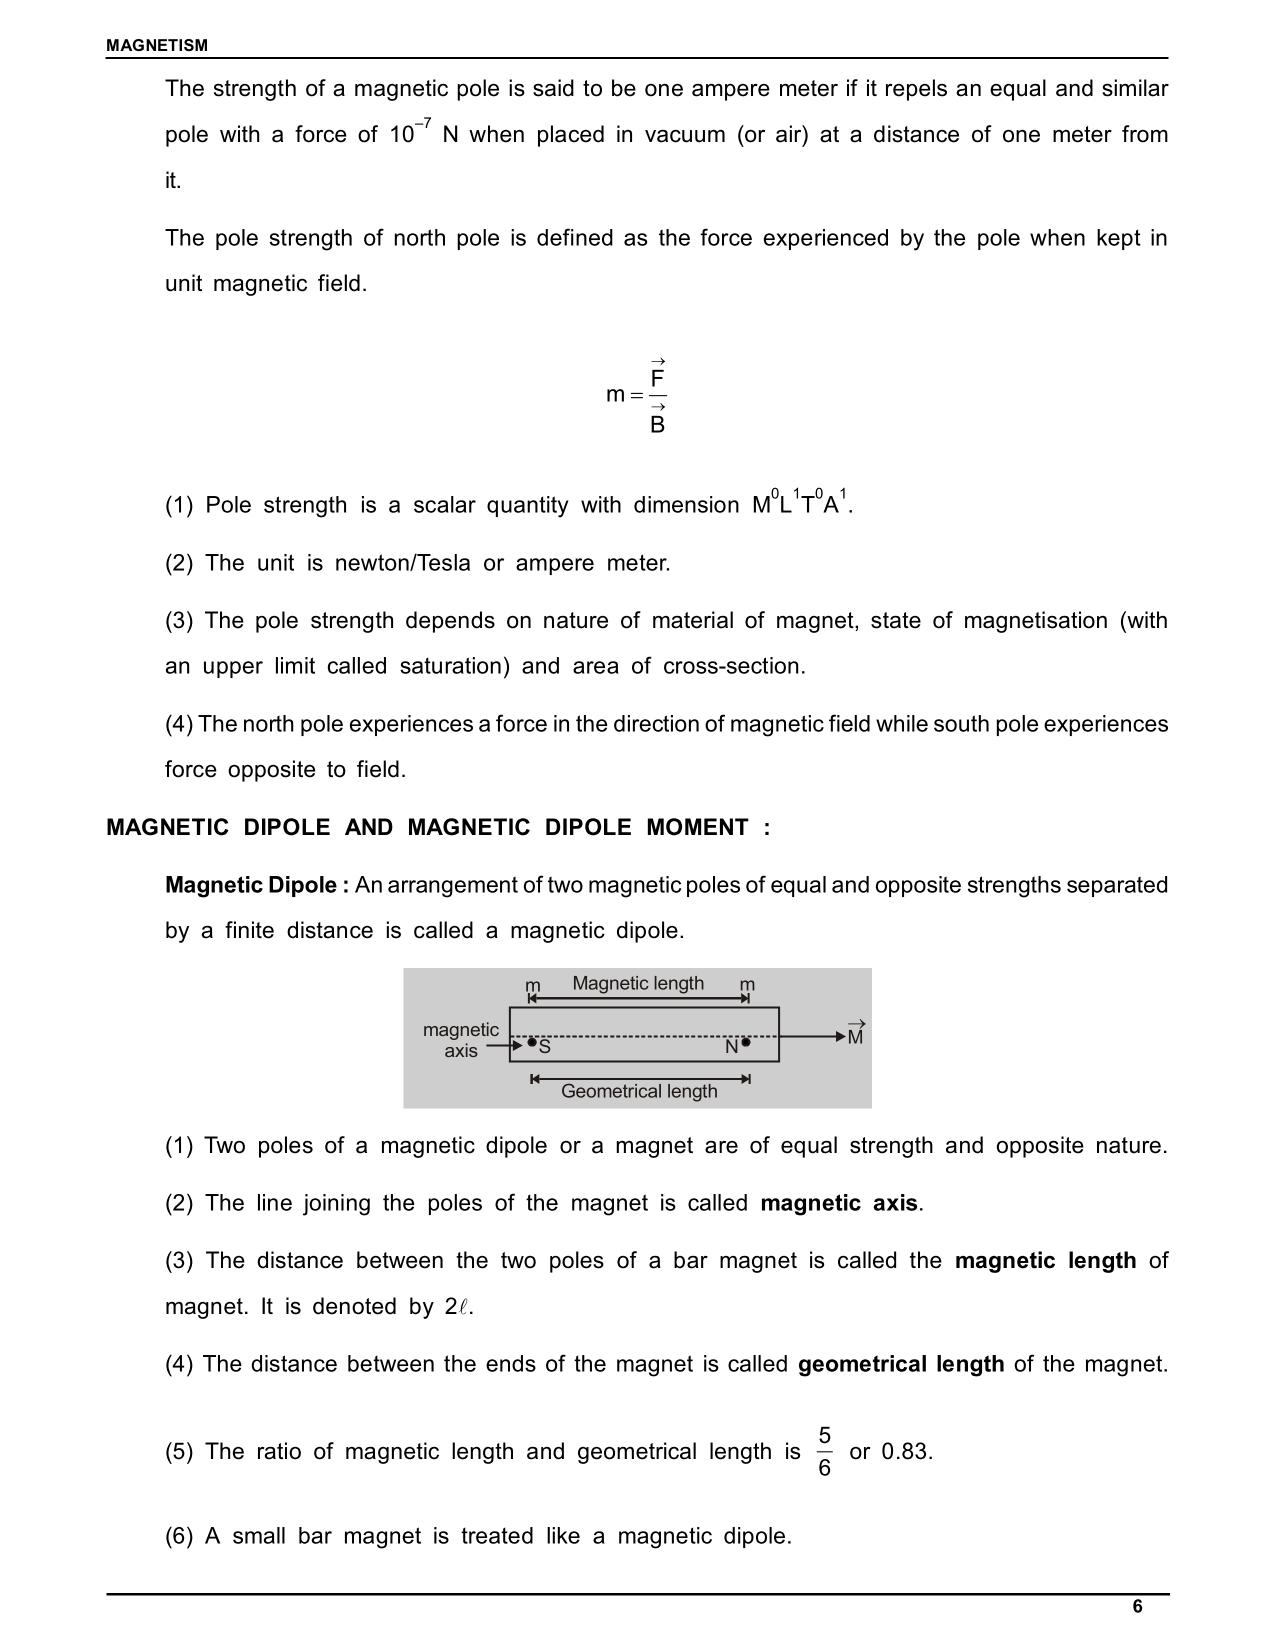 Magnetic Dipole Moment class 12